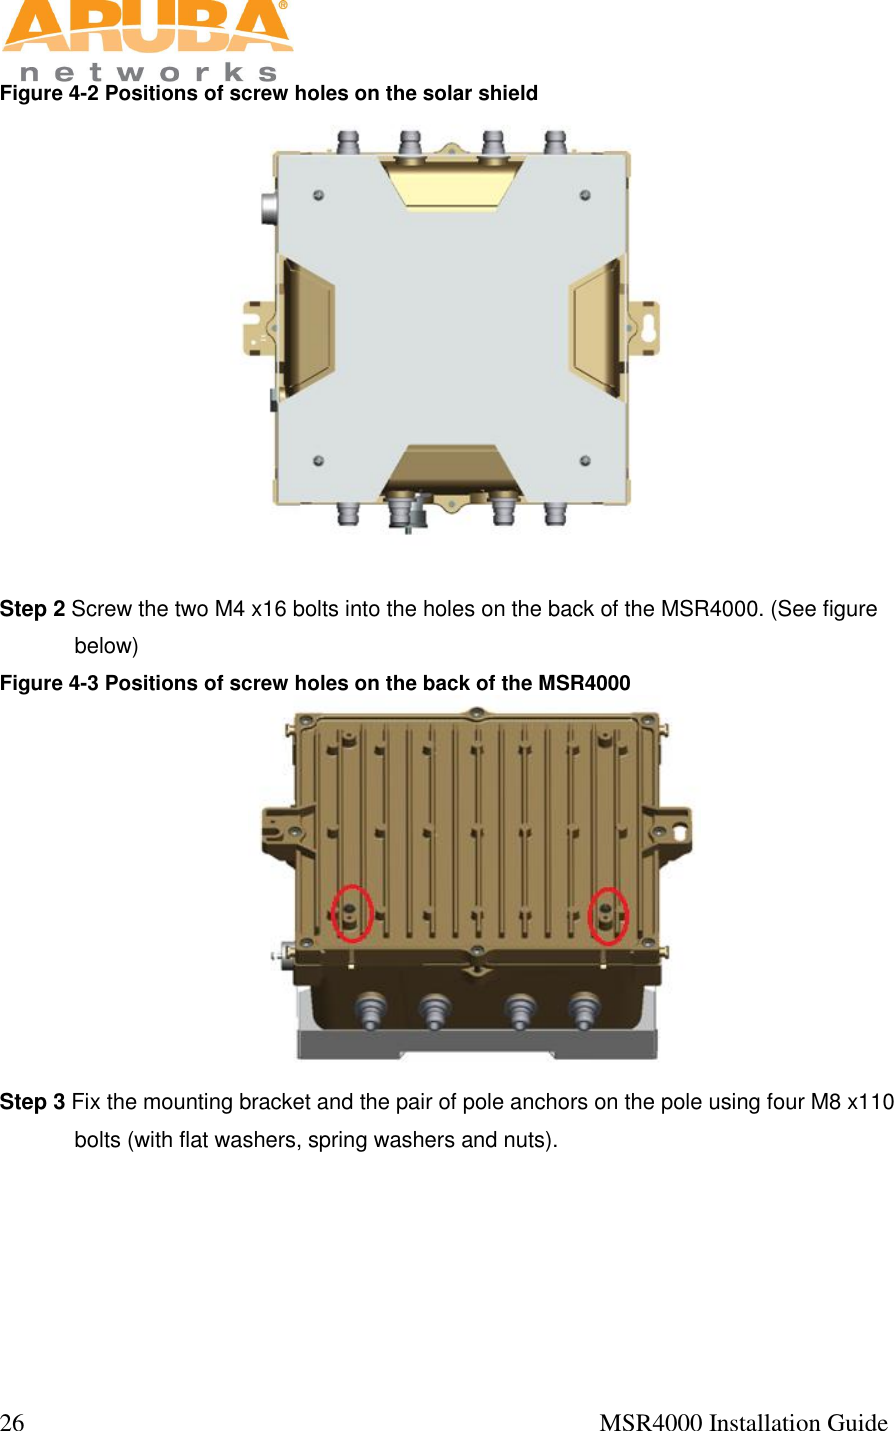  26                                                                                            MSR4000 Installation Guide   Figure 4-2 Positions of screw holes on the solar shield     Step 2 Screw the two M4 x16 bolts into the holes on the back of the MSR4000. (See figure below)  Figure 4-3 Positions of screw holes on the back of the MSR4000  Step 3 Fix the mounting bracket and the pair of pole anchors on the pole using four M8 x110 bolts (with flat washers, spring washers and nuts).    